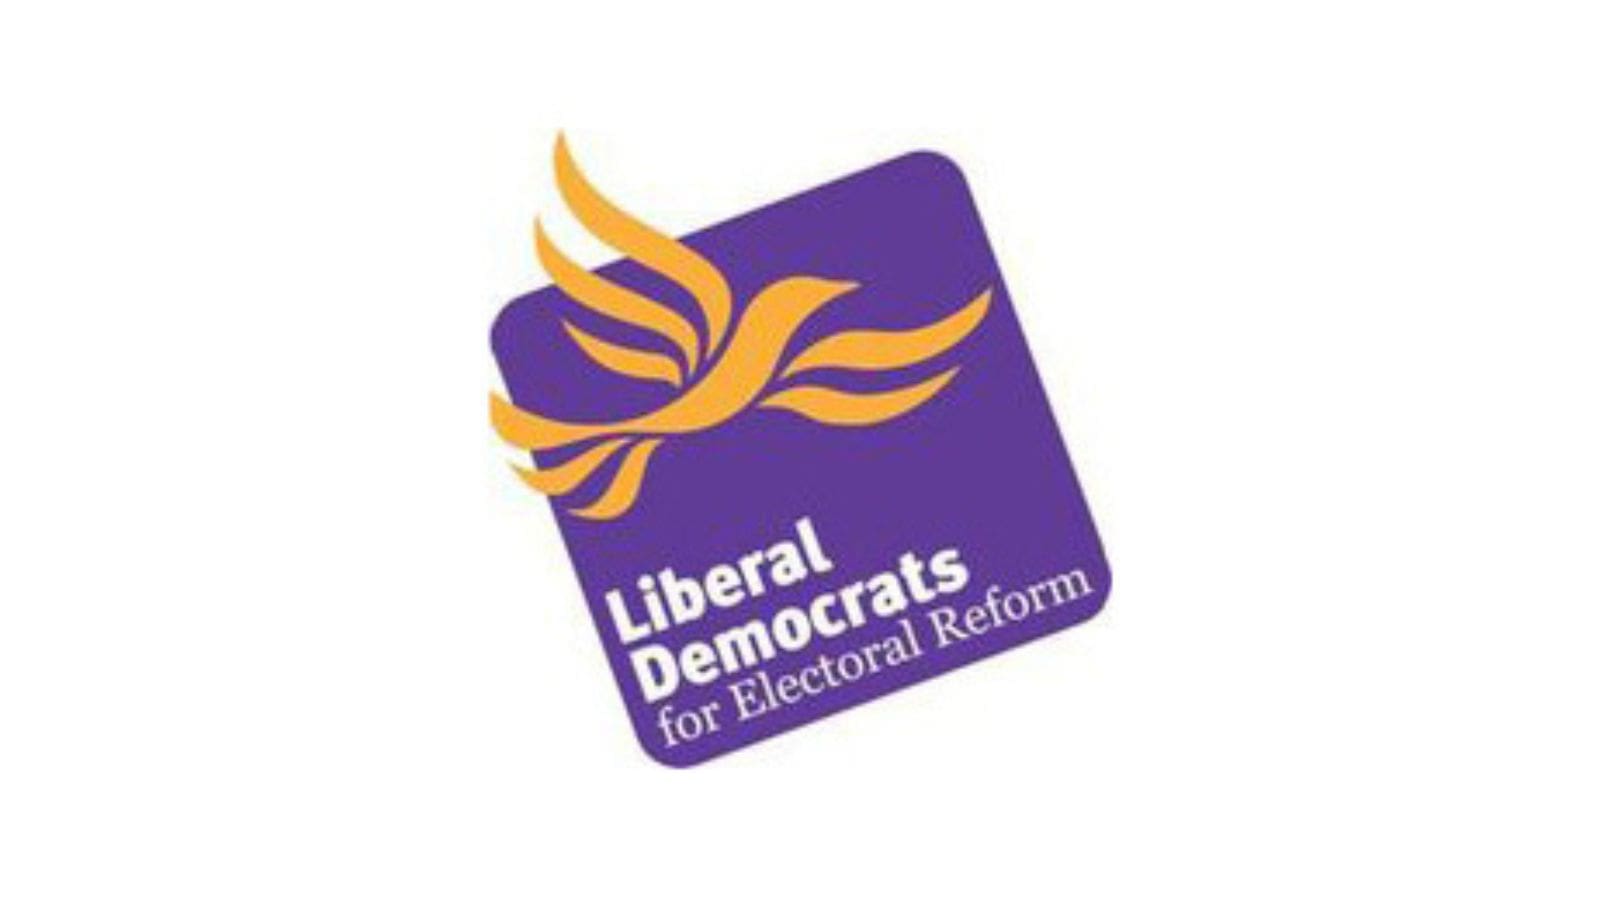 A yellow Liberal Democrat bird with a purple square around it. Under this is the words "Liberal Democrats for Electoral Reform".